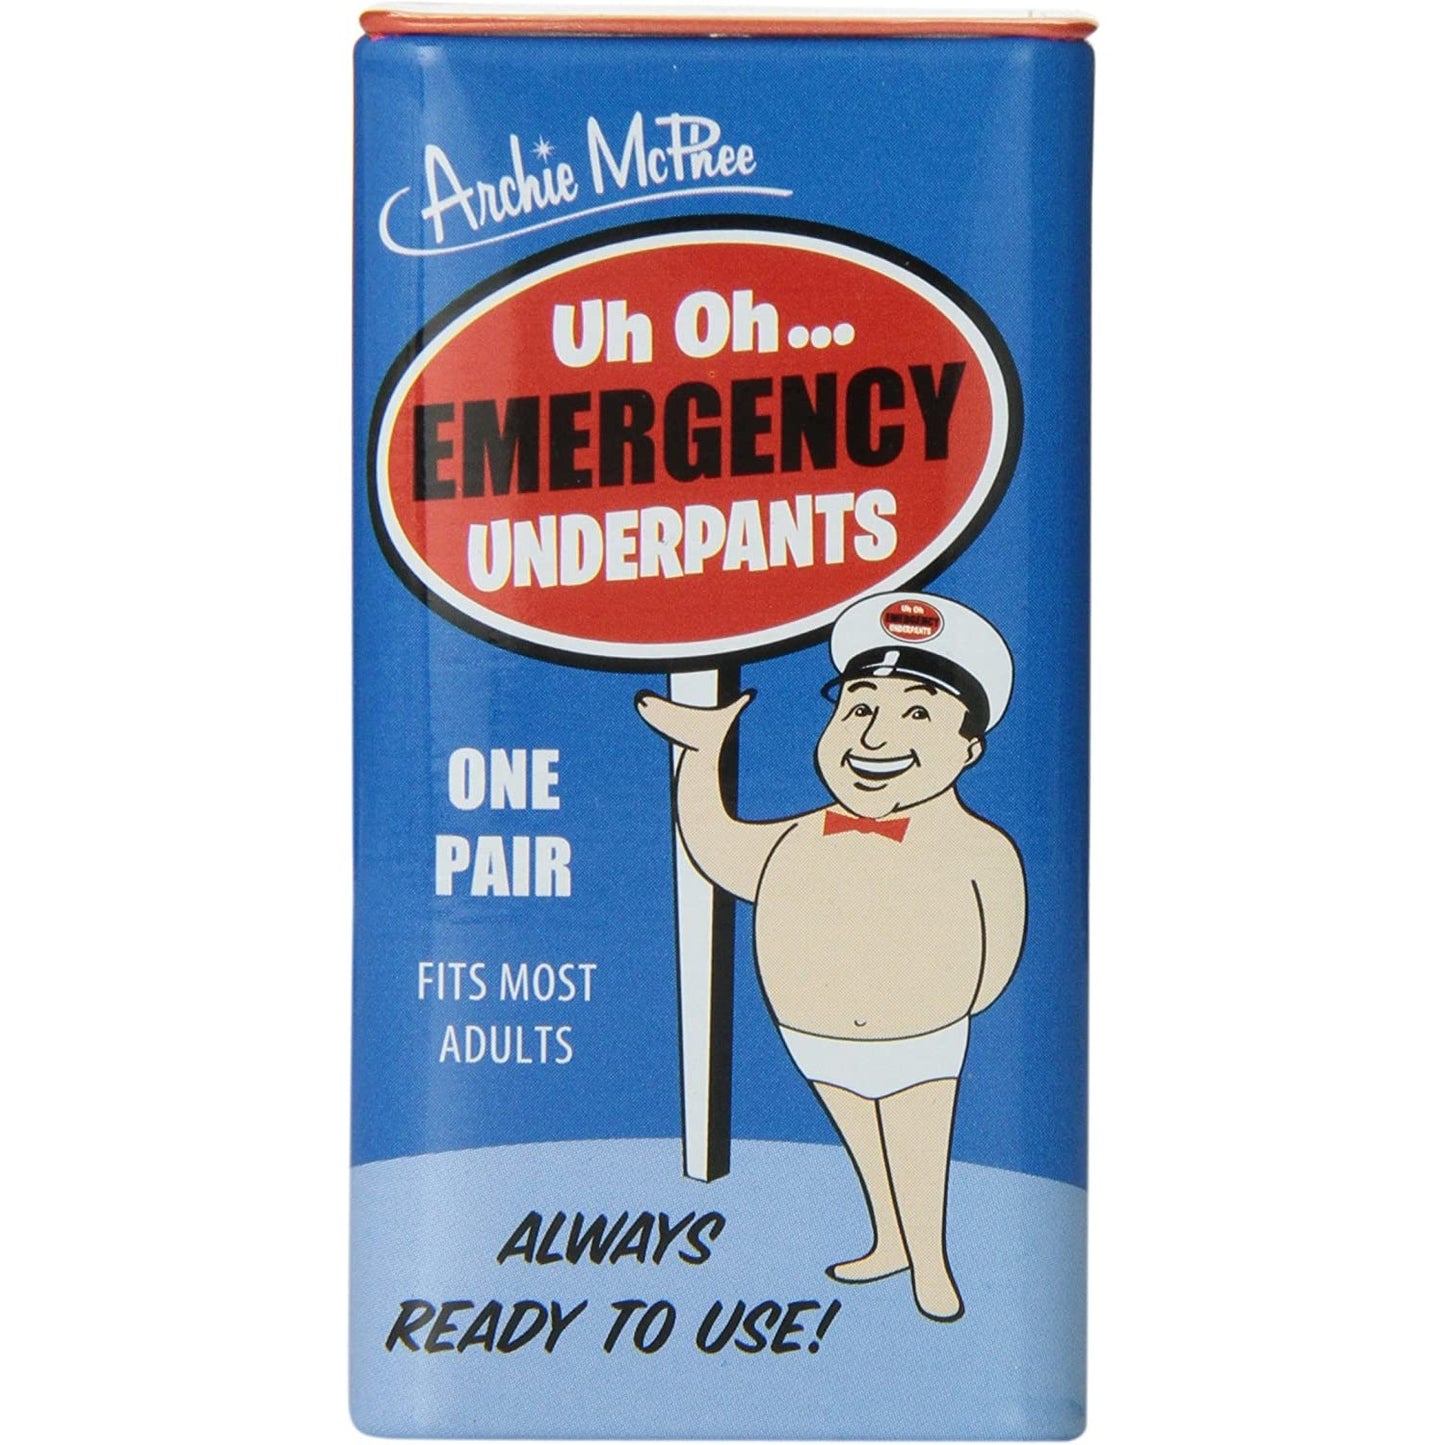 A tin can of emergency underpants. The text reads, 'Archie McPhee. Uh Oh... emergency underpants. One pair fits most adults. Ready to use!'